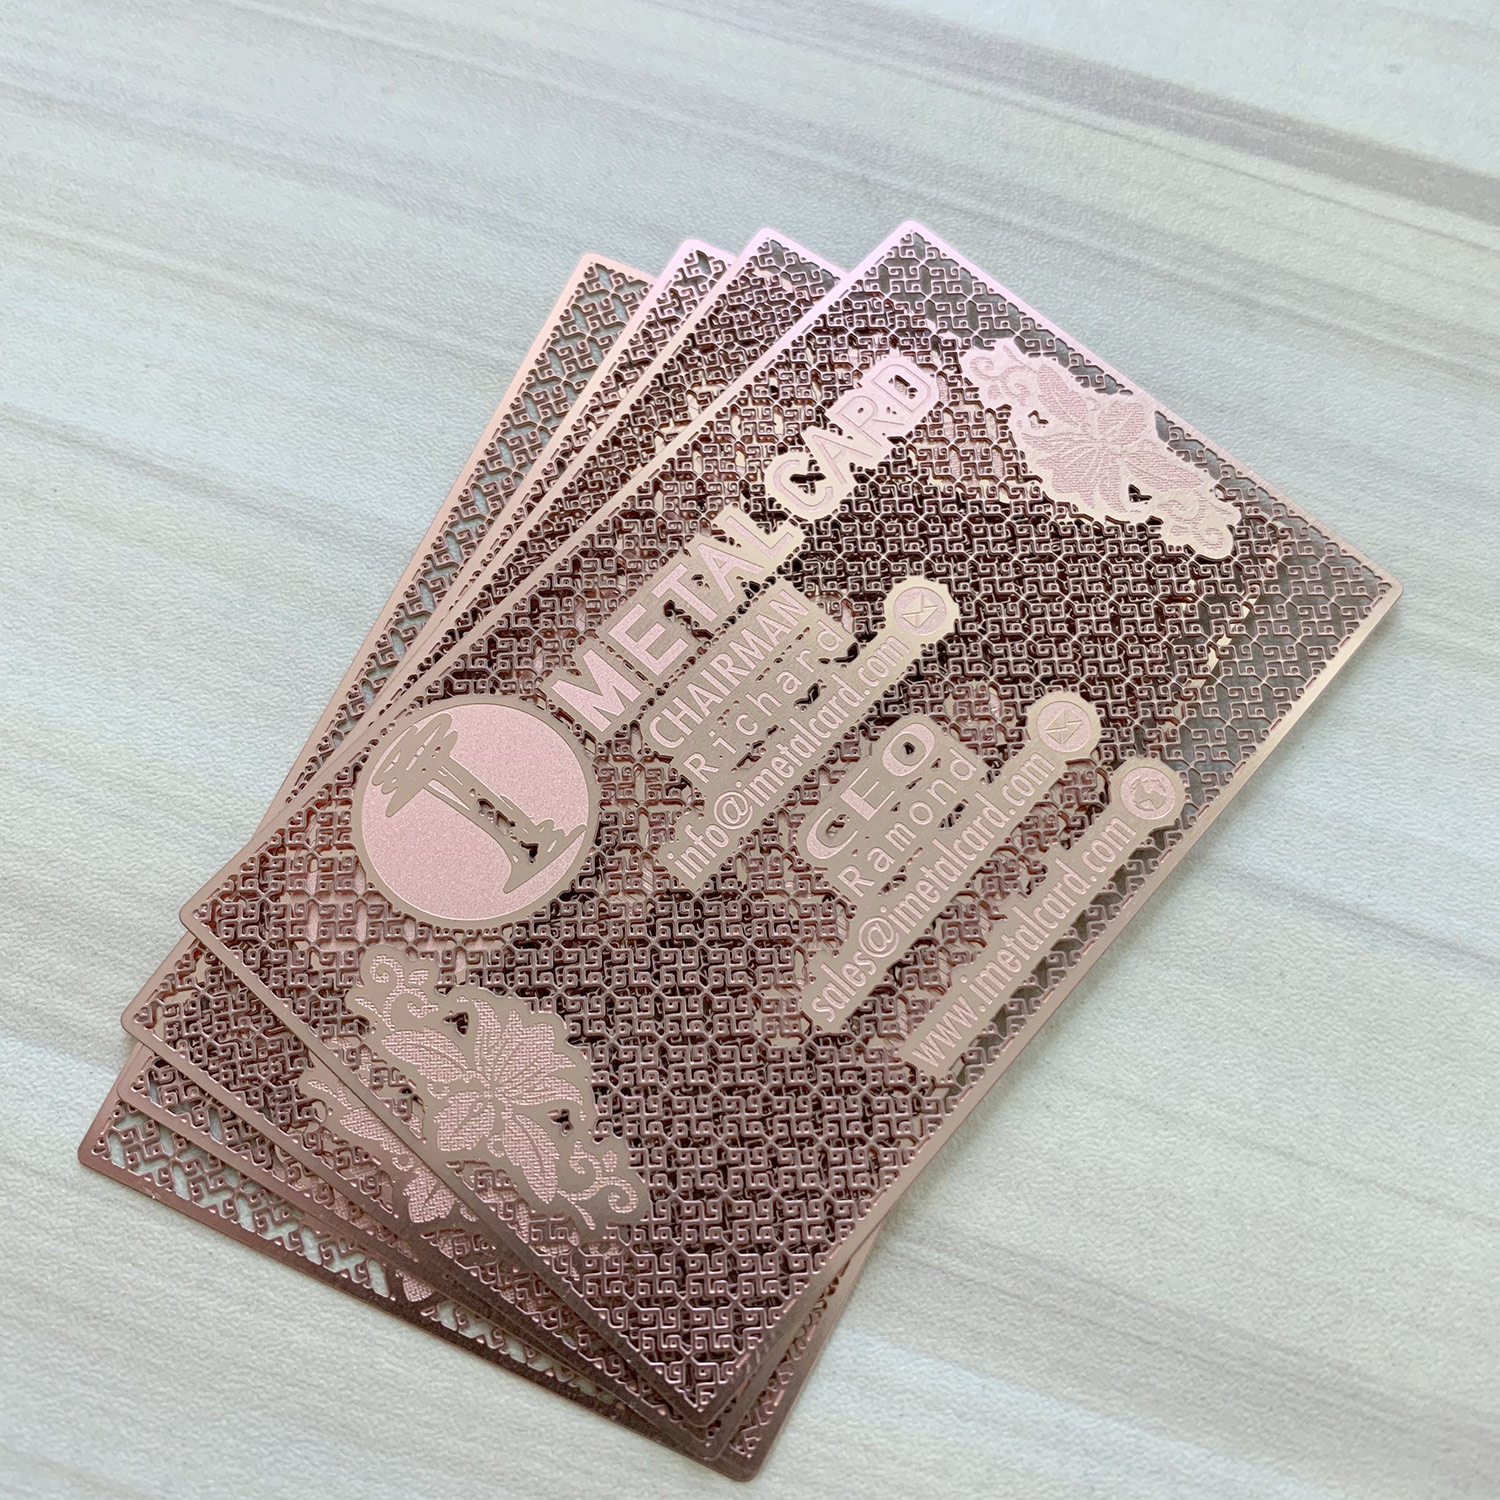 Thin rose gold metal business cards